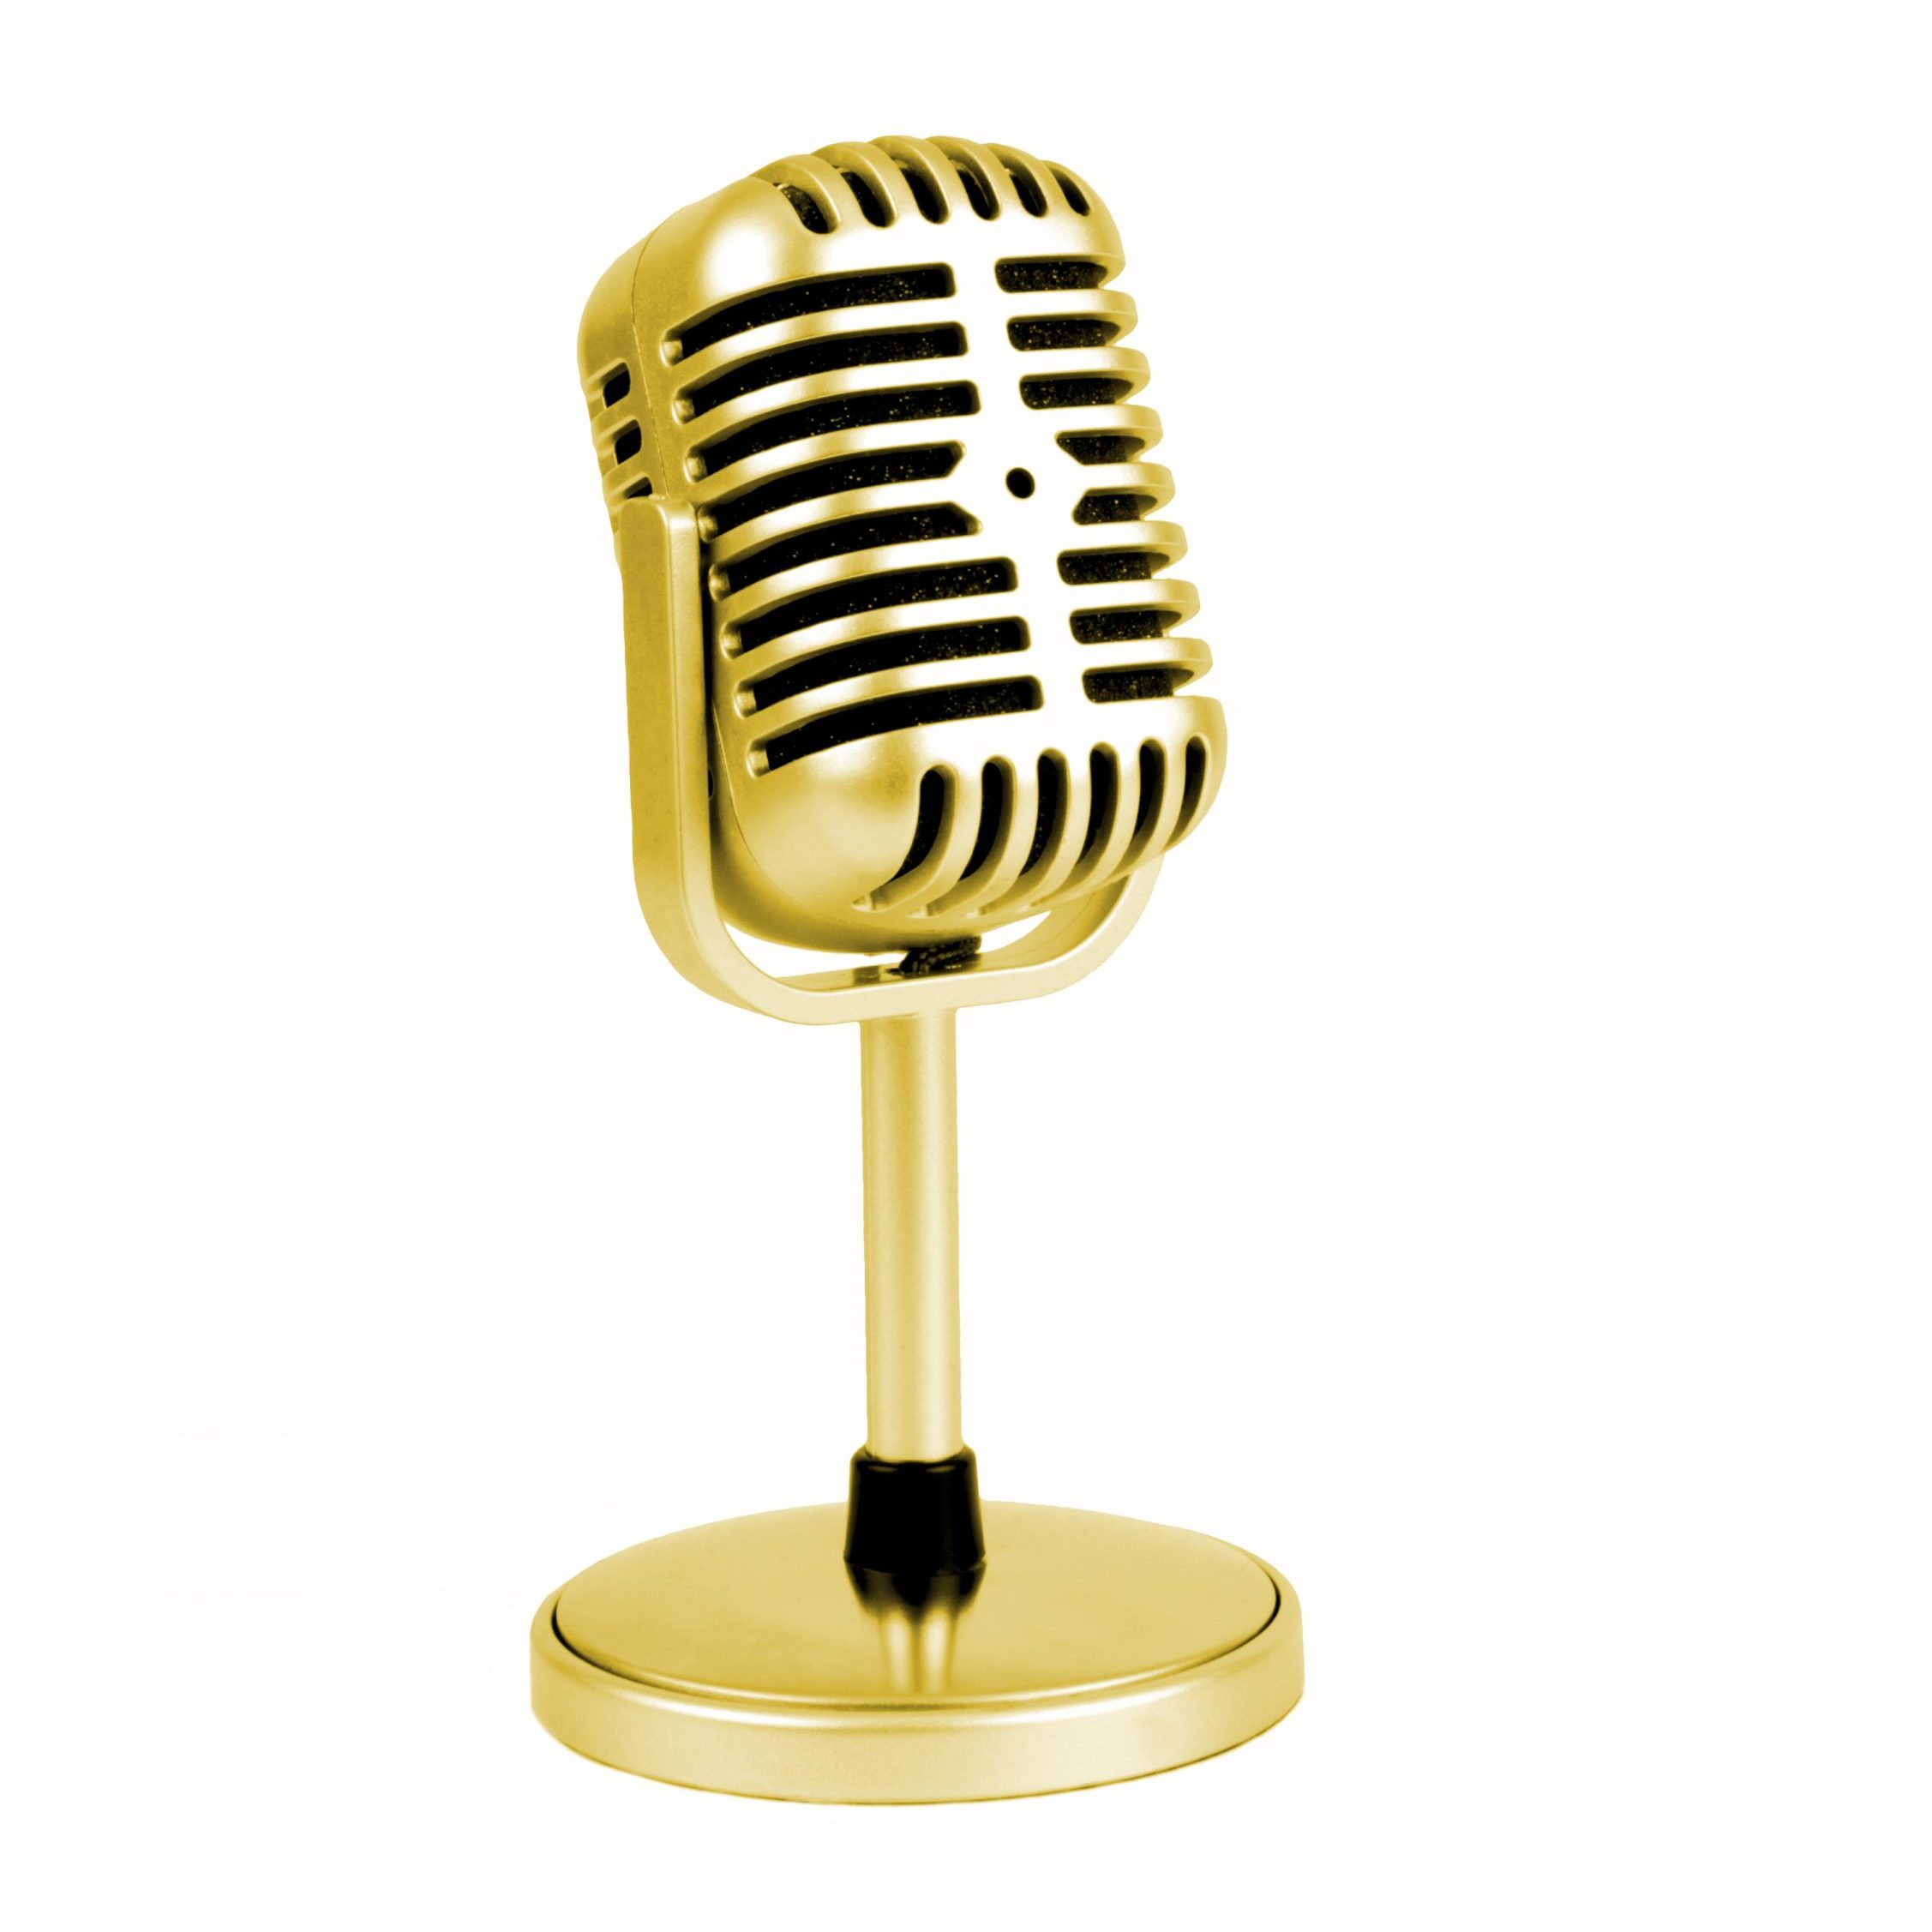 Retro,Microphone.,(,Dynamic,Microphone,),On,White,Bacground